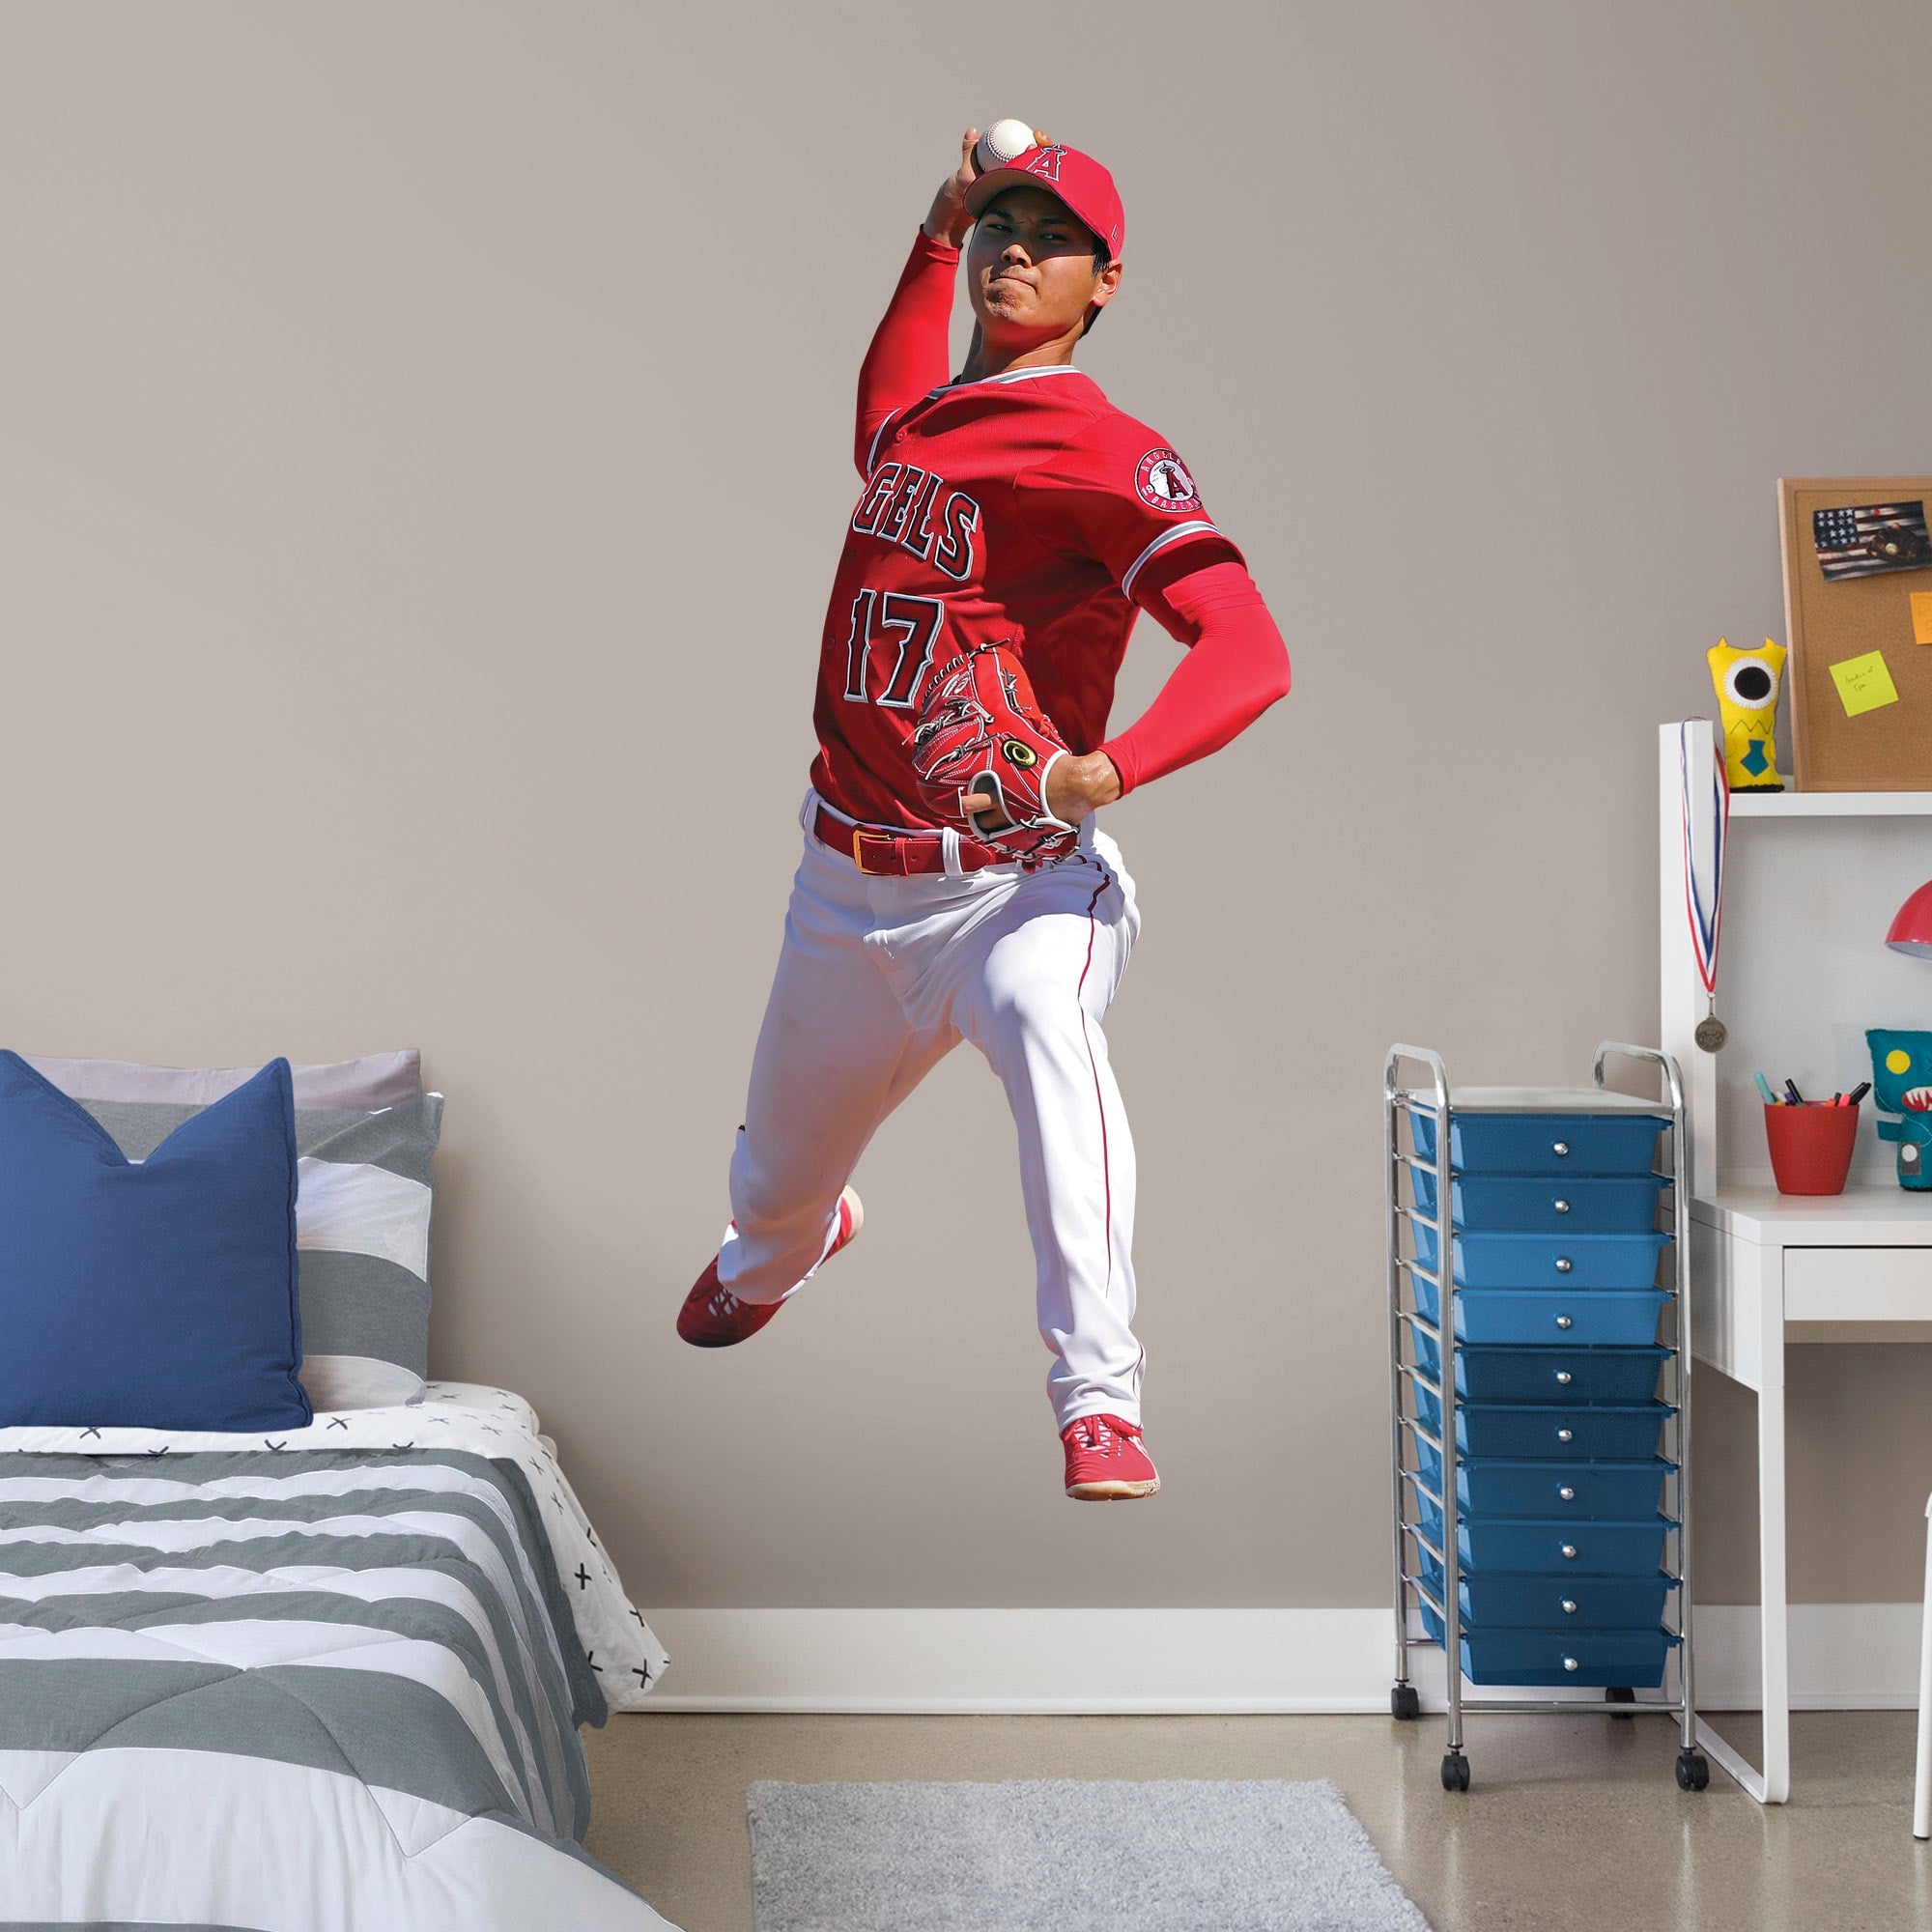 Shohei Ohtani for LA Angels - Officially Licensed MLB Removable Wall Decal Life-Size Athlete + 2 Decals (35"W x 78"H) by Fathead